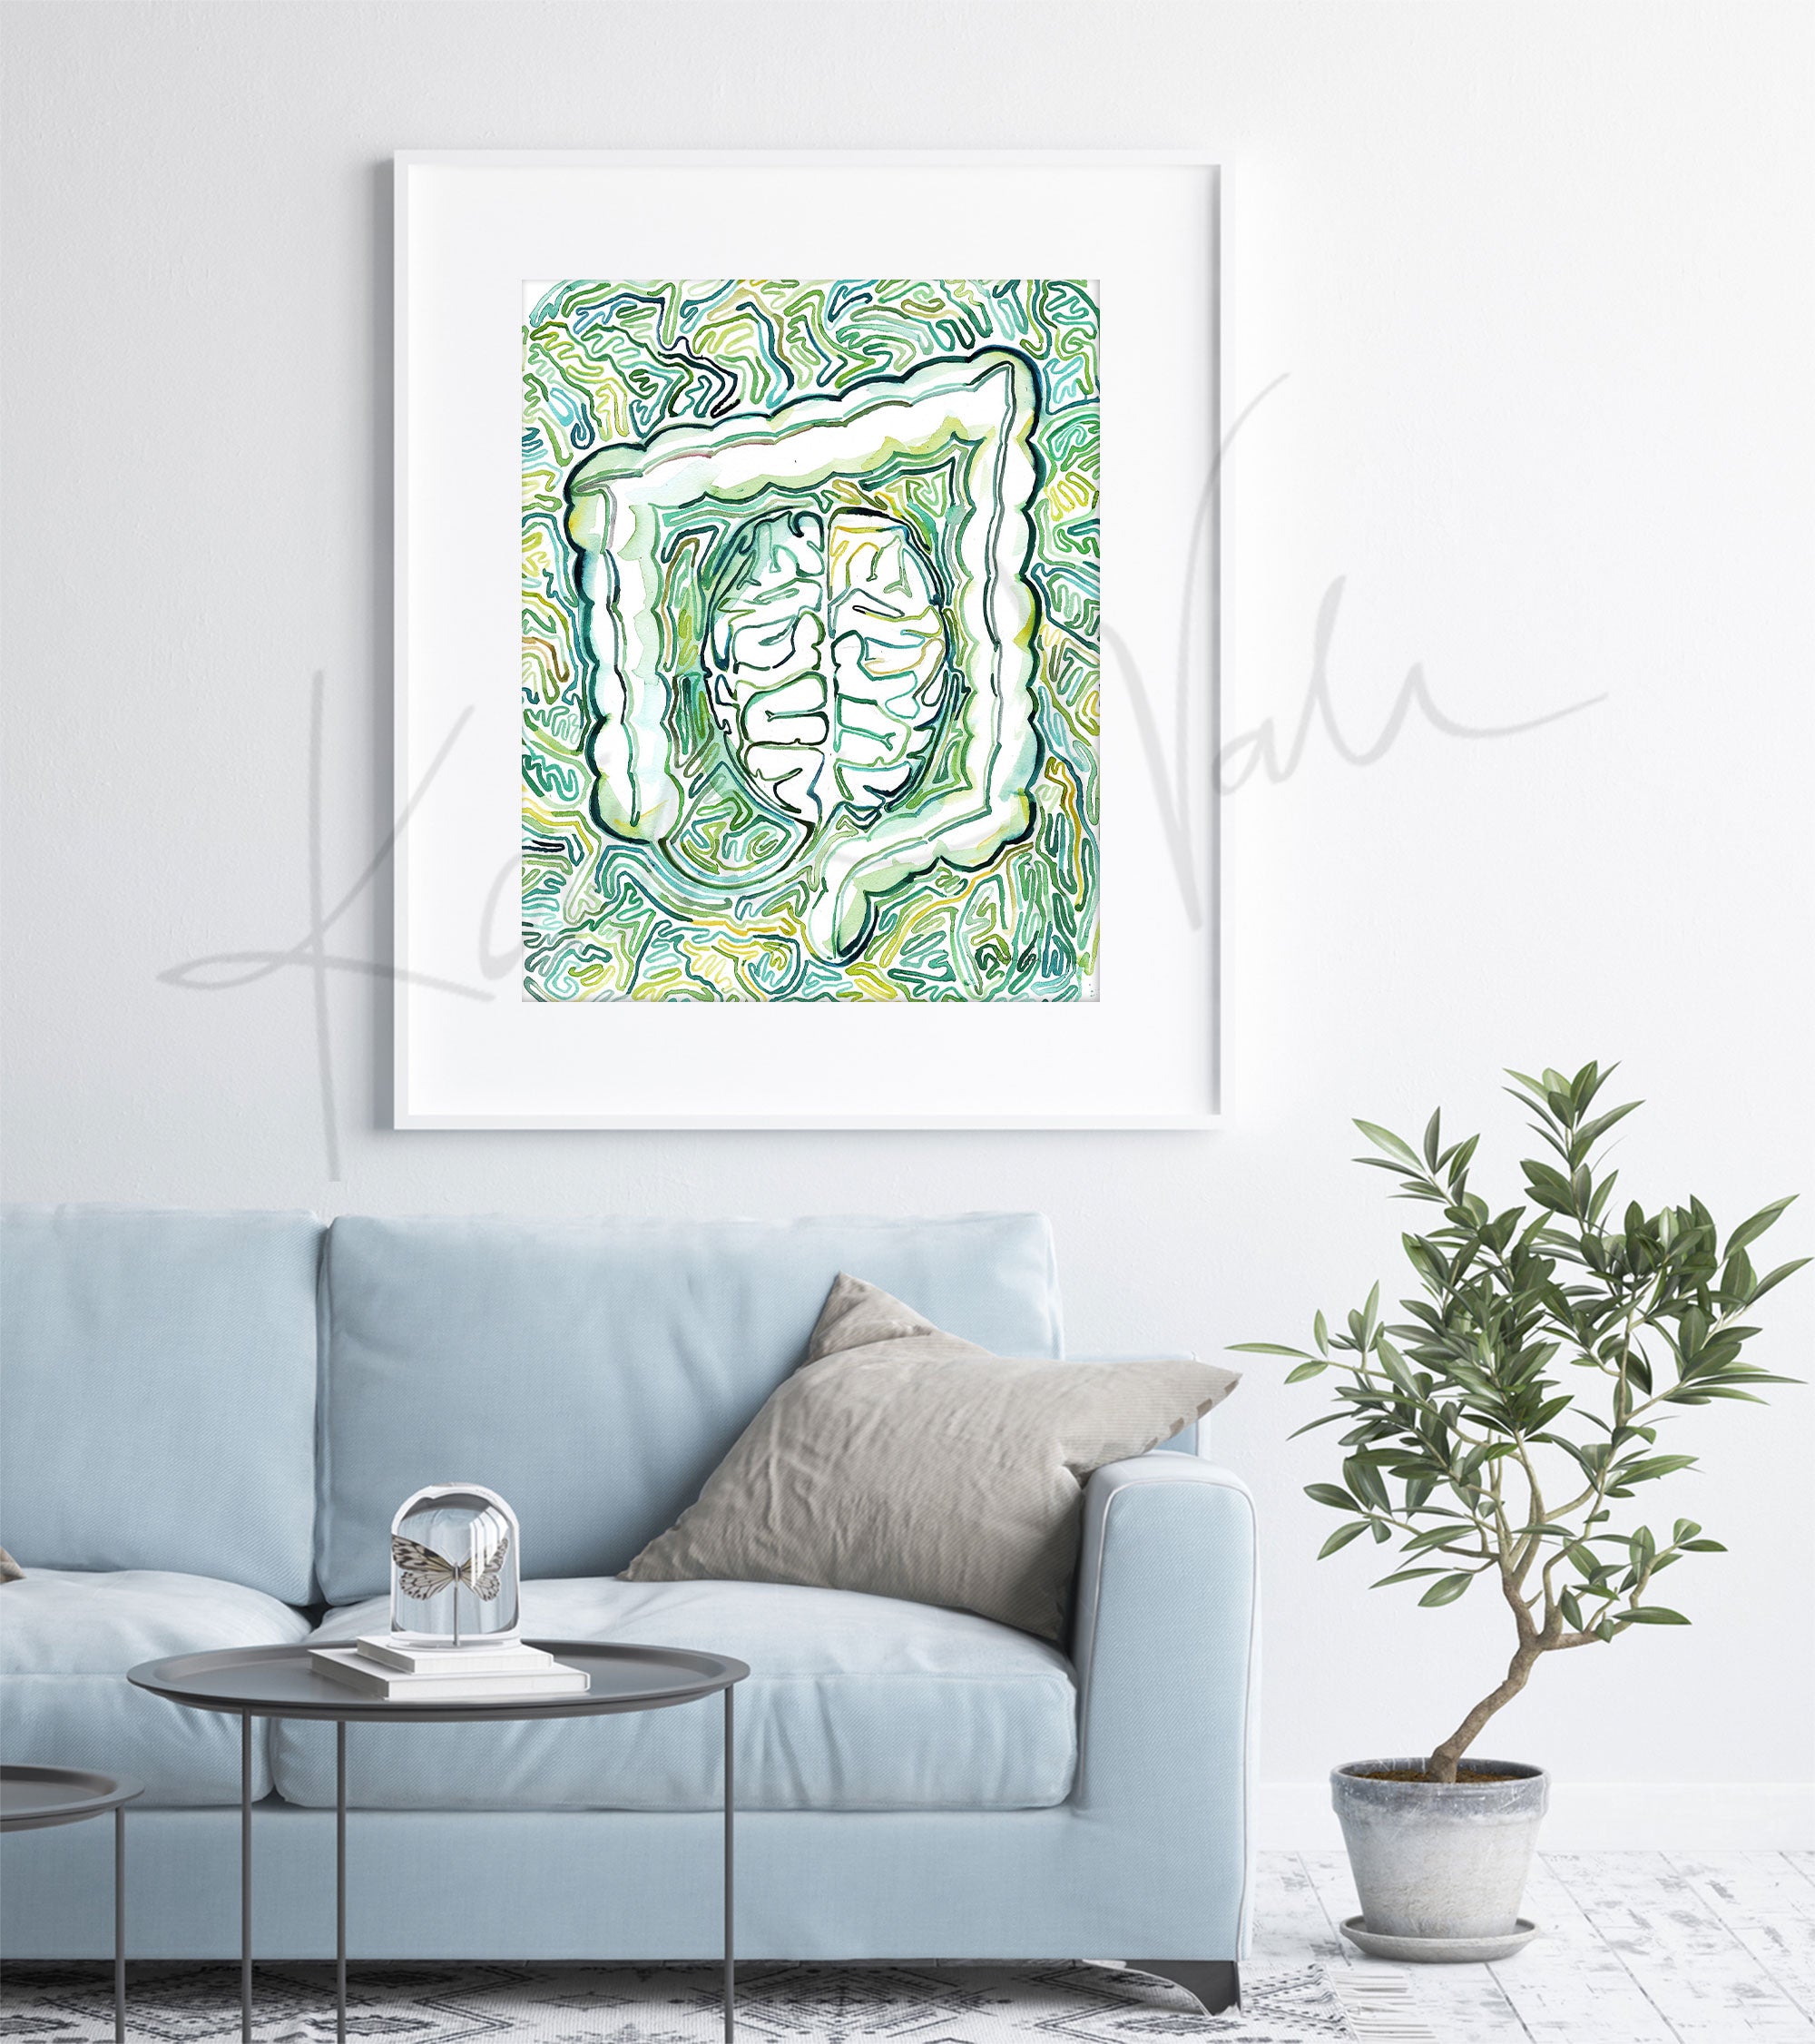 Framed watercolor painting of a portrayal of the gut-mind-body connection. The painting is hanging over a blue couch.